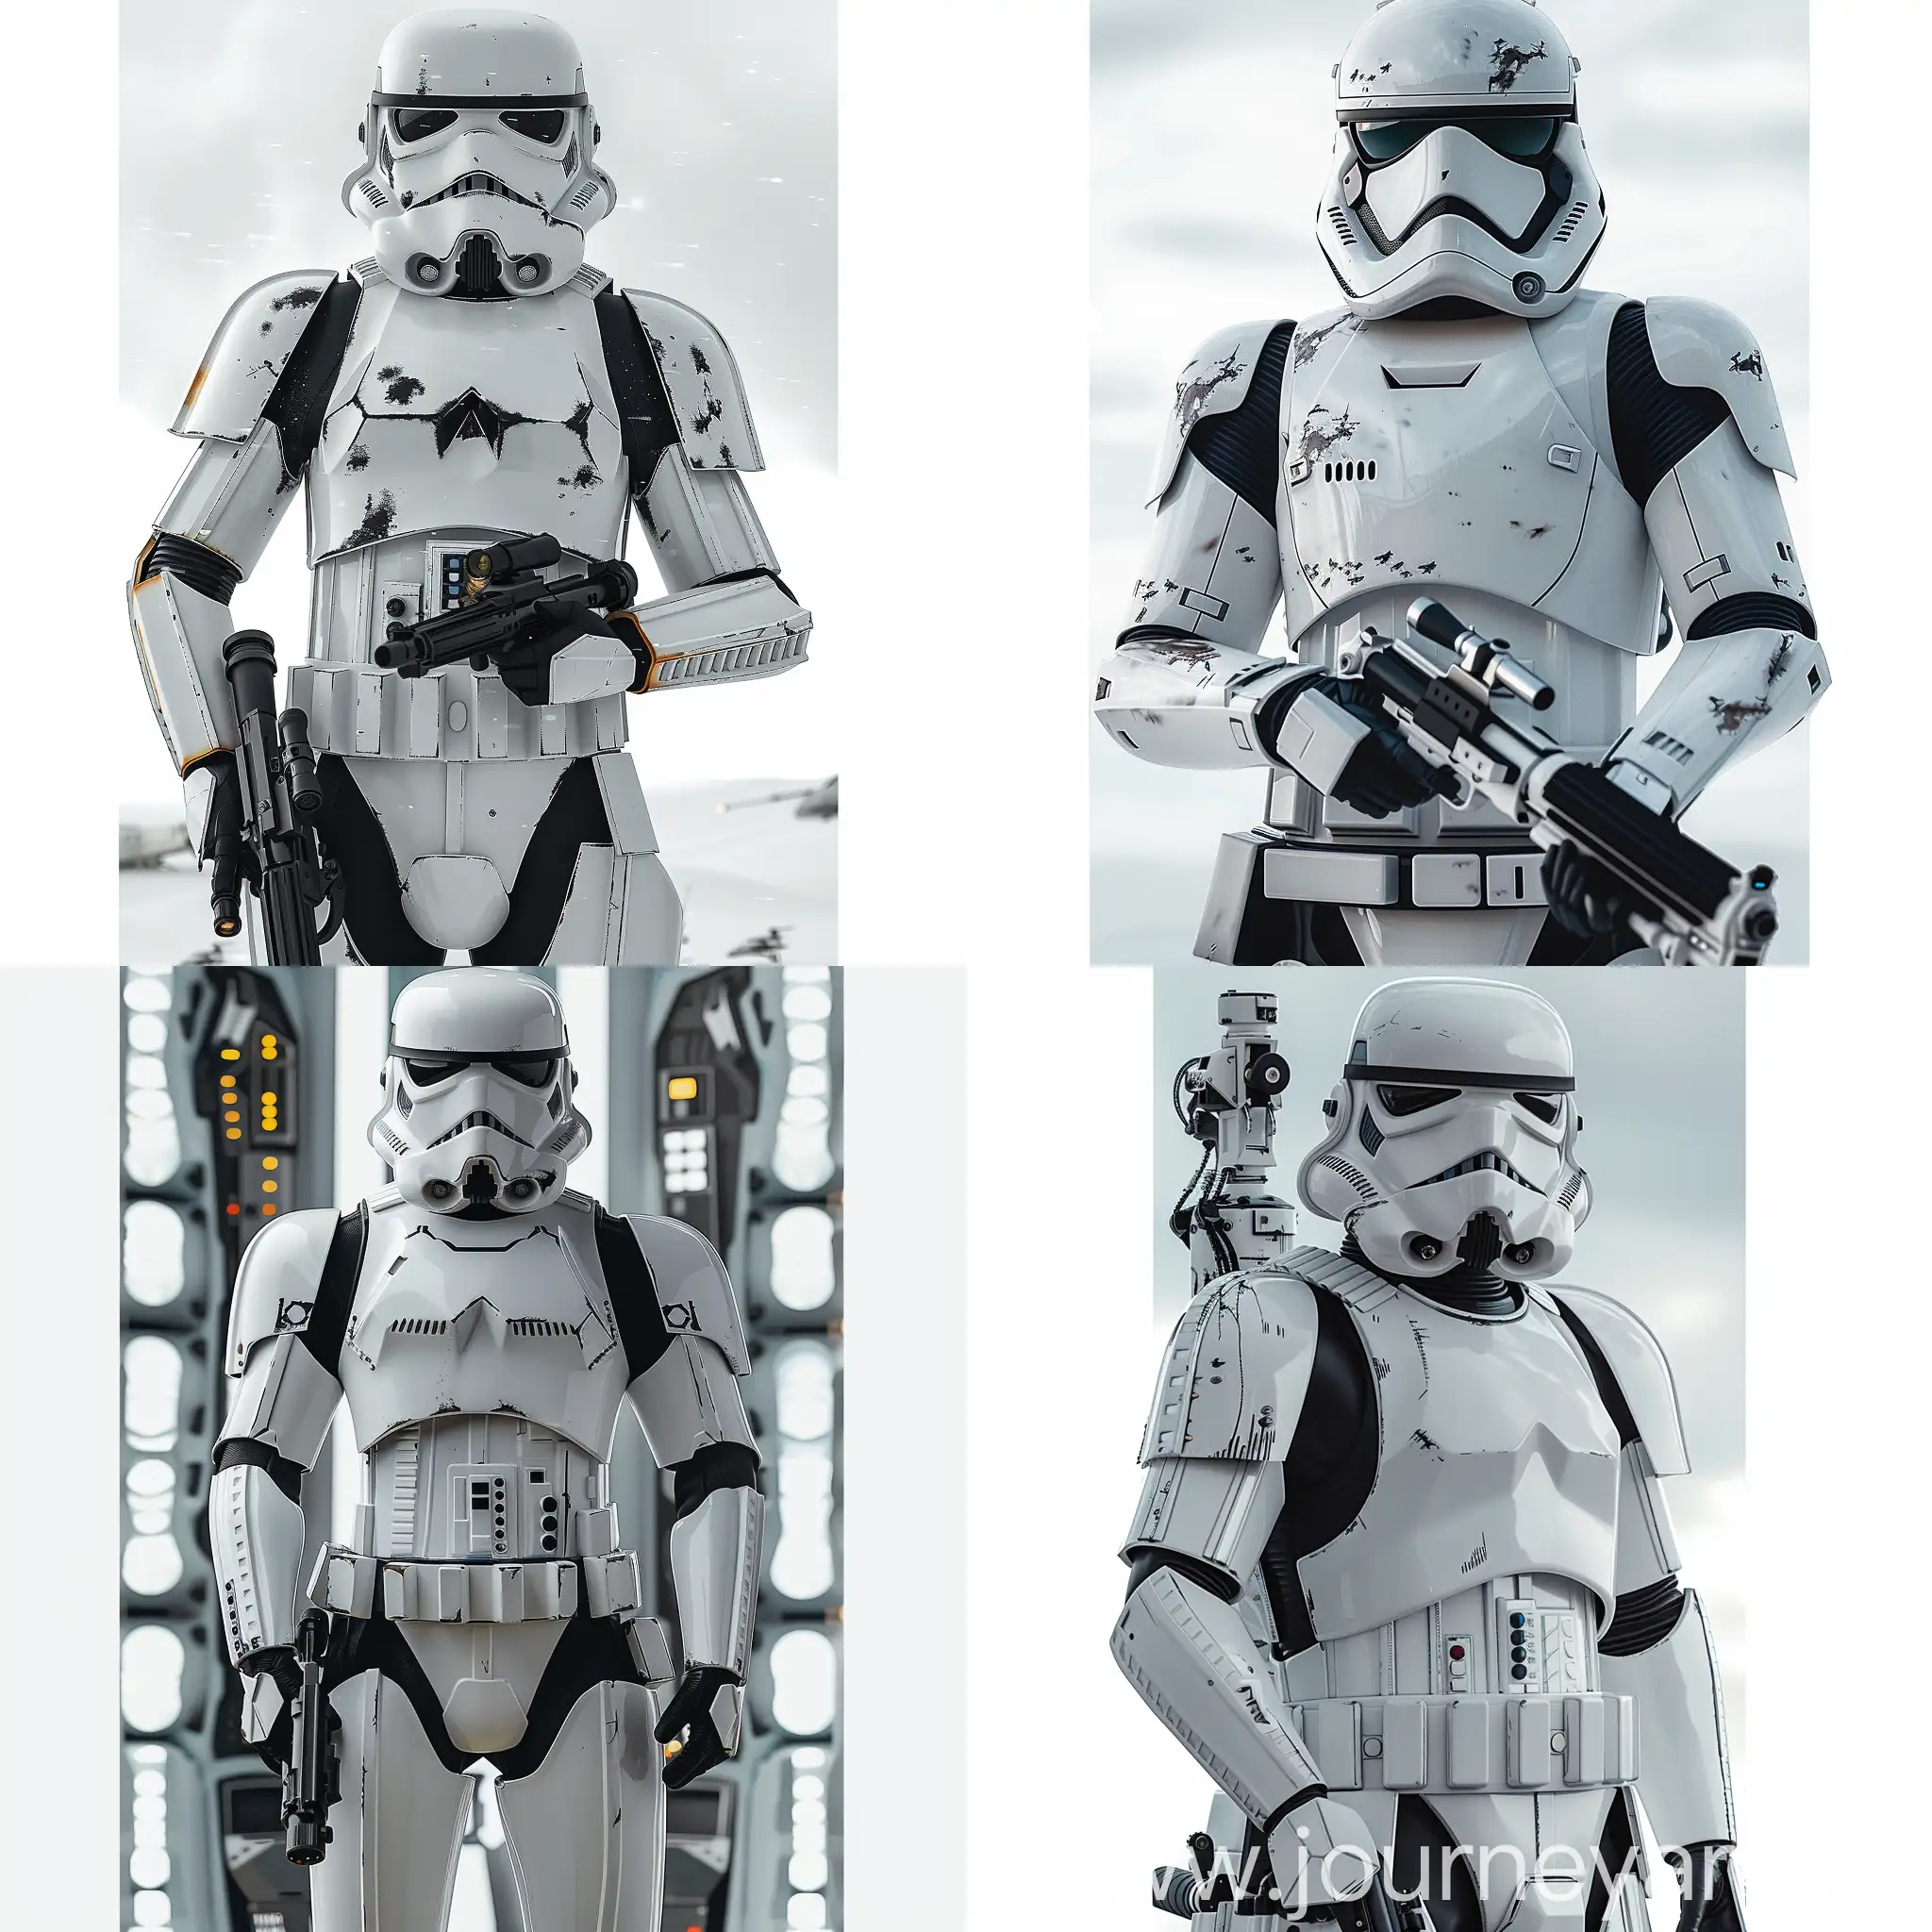 Futuristic Star Wars Stormtrooper https://static.wikia.nocookie.net/starwars/images/b/b9/Stormtrooper-ROOCE.png/revision/latest?cb=20240106032223, Solar-Powered Armor, Recyclable Materials, Biodegradable Components, Energy-Efficient Technology, Water Recycling System, Carbon Capture Technology, Plant-Based Armor Padding, Electric-Powered Vehicles, Compostable Food Packaging, Environmental Monitoring System, Augmented Reality Visor, Integrated Heads-Up Display (HUD), Advanced Biometric Scanner, Advanced AI Assistance, Holographic Communication System, Stealth Camouflage Technology, Jetpack, Energy Shield Generator, Nanotechnology Healing Pods, Personal Energy Weapon System, Grapple Hook Launcher, Multi-tool Arm Attachment, Electroshock Gauntlets, Personal Shield Generator, Energy Tether, Holographic Decoy Projector, Thermal Imaging Scanner, Self-Destruct Mechanism, Cloaking Device, Integrated Drone Swarm,  octane render --stylize 1000